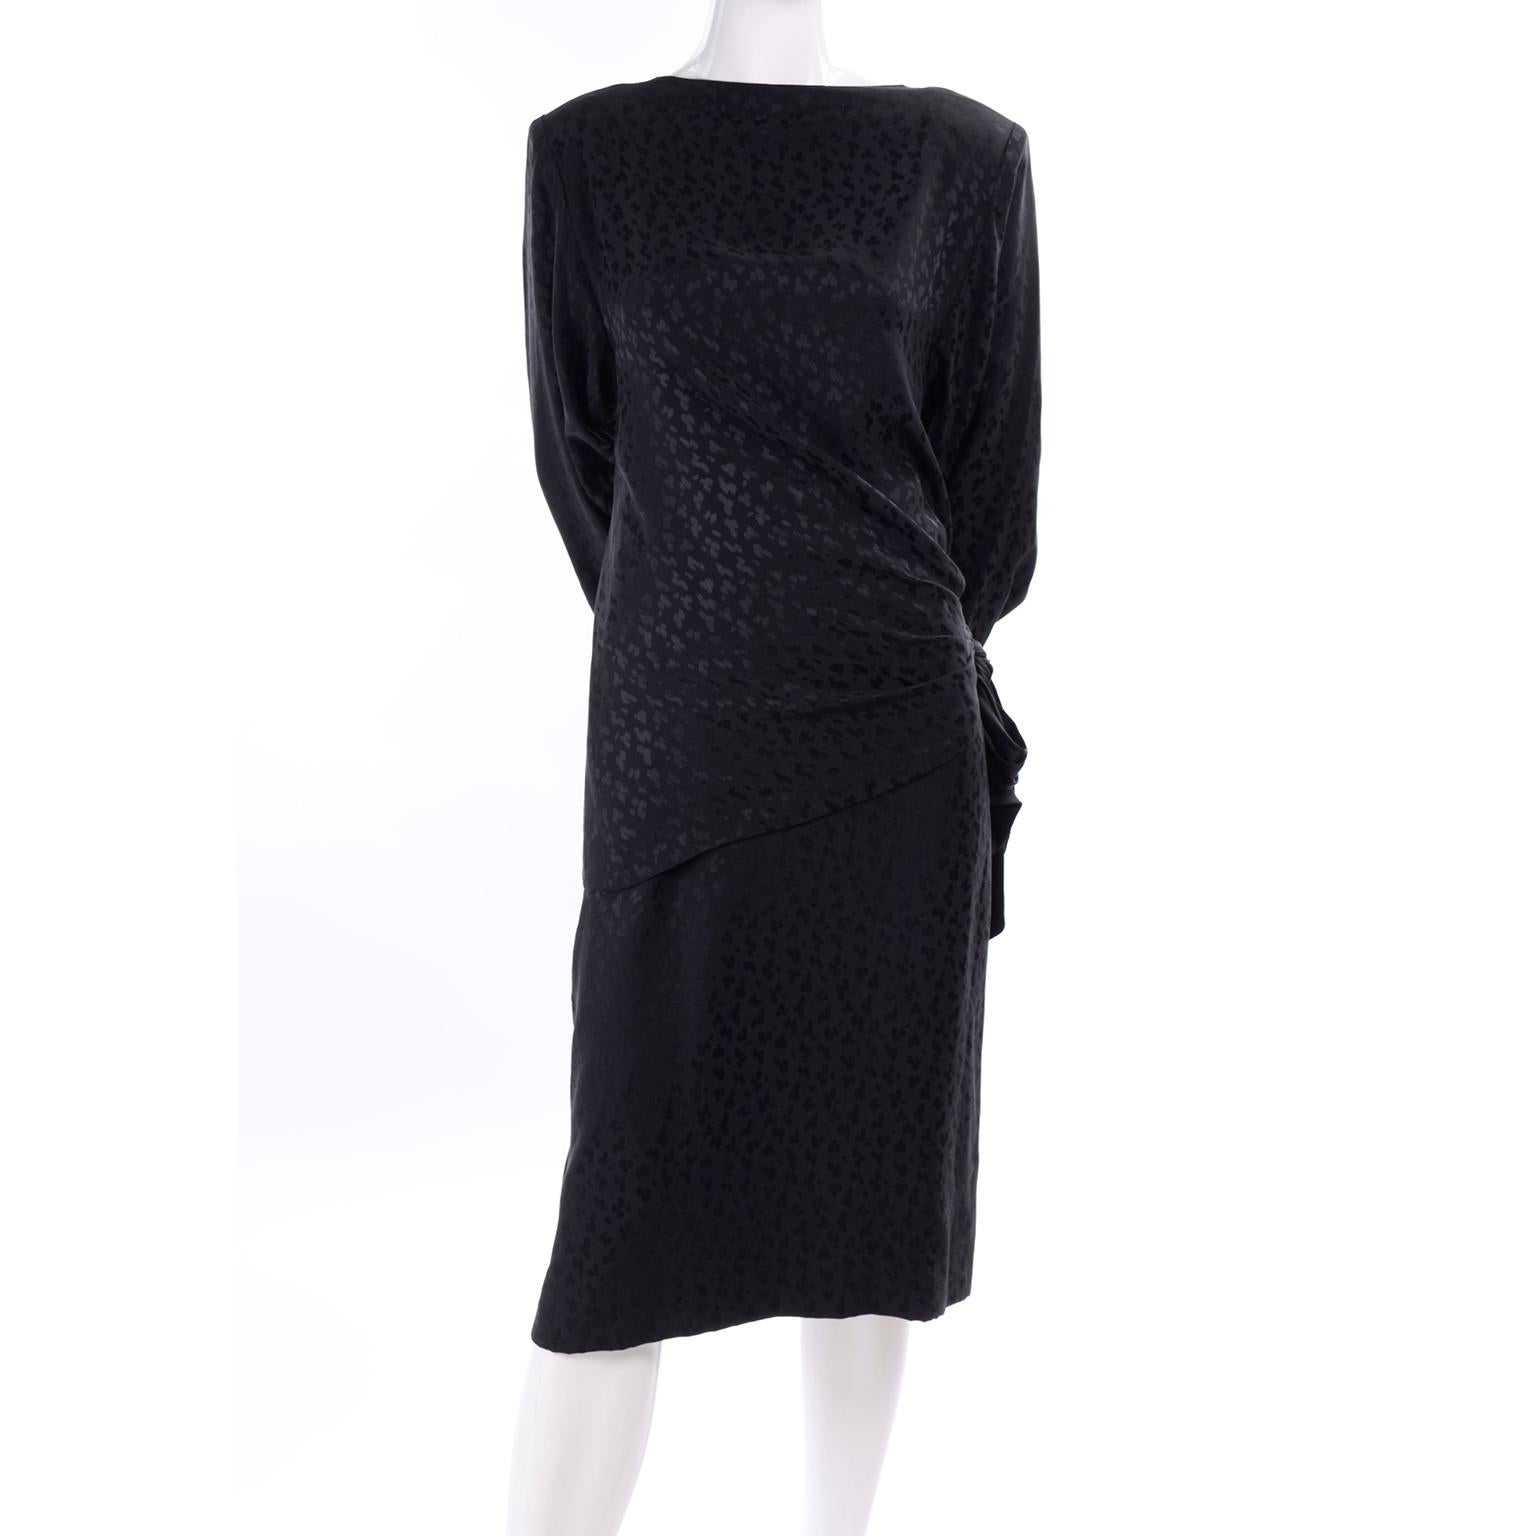 This is a fabulous Adolfo 2 piece black silk dress with pencil skirt and top from the 1980's. The black silk fabric has a beautiful tone on tone leopard print pattern. The top has a dramatic draping tie at the natural waist, draping down over the